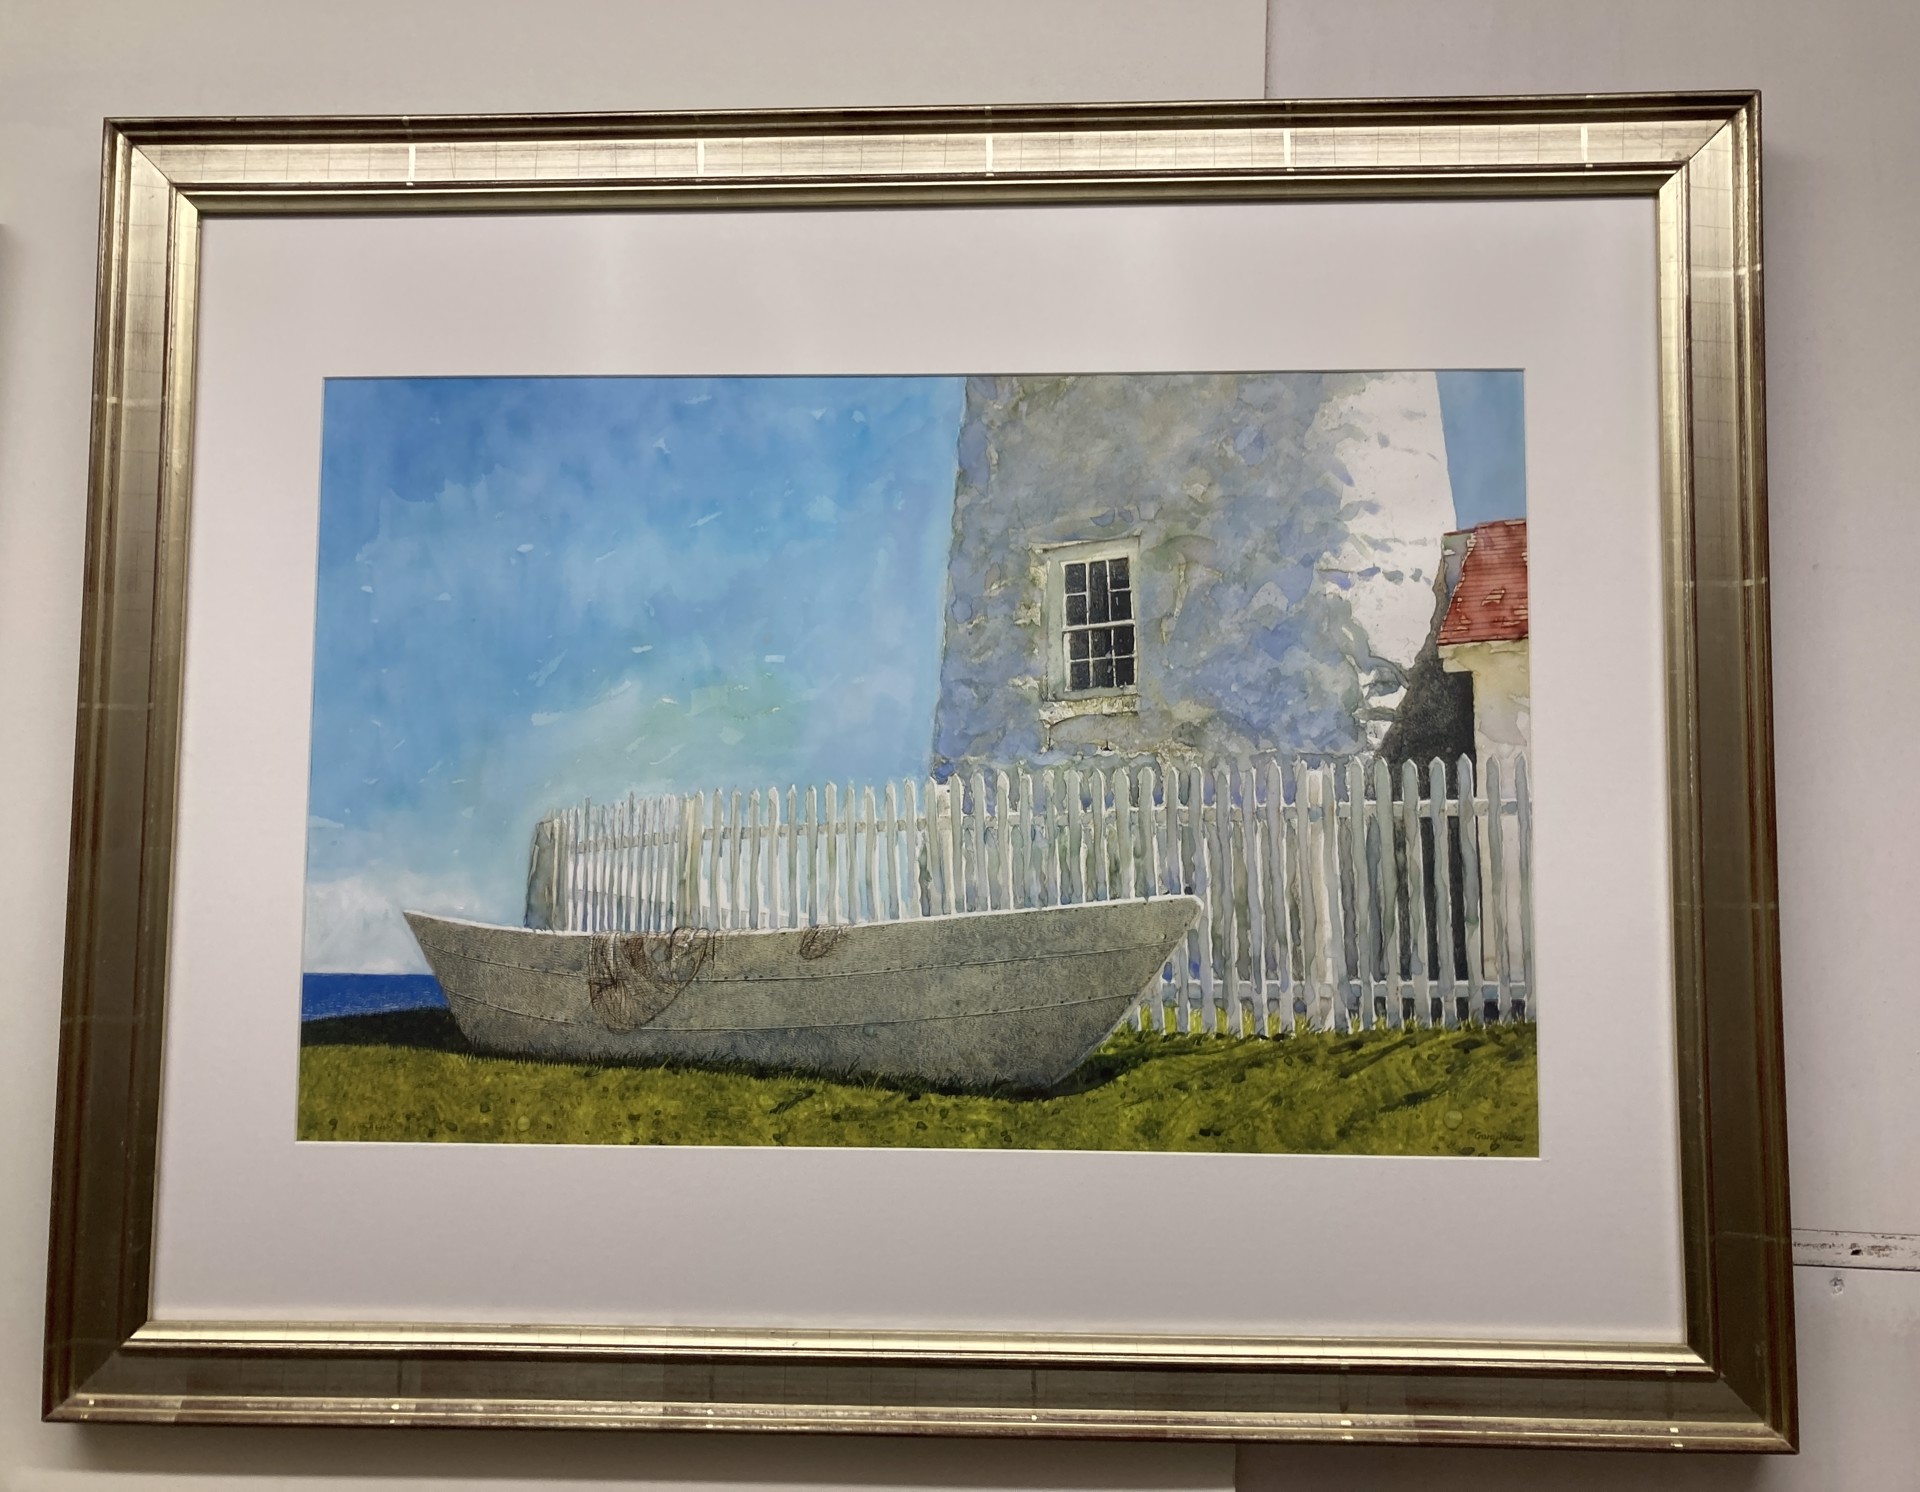 Dory at Pemaquid by Gary Akers